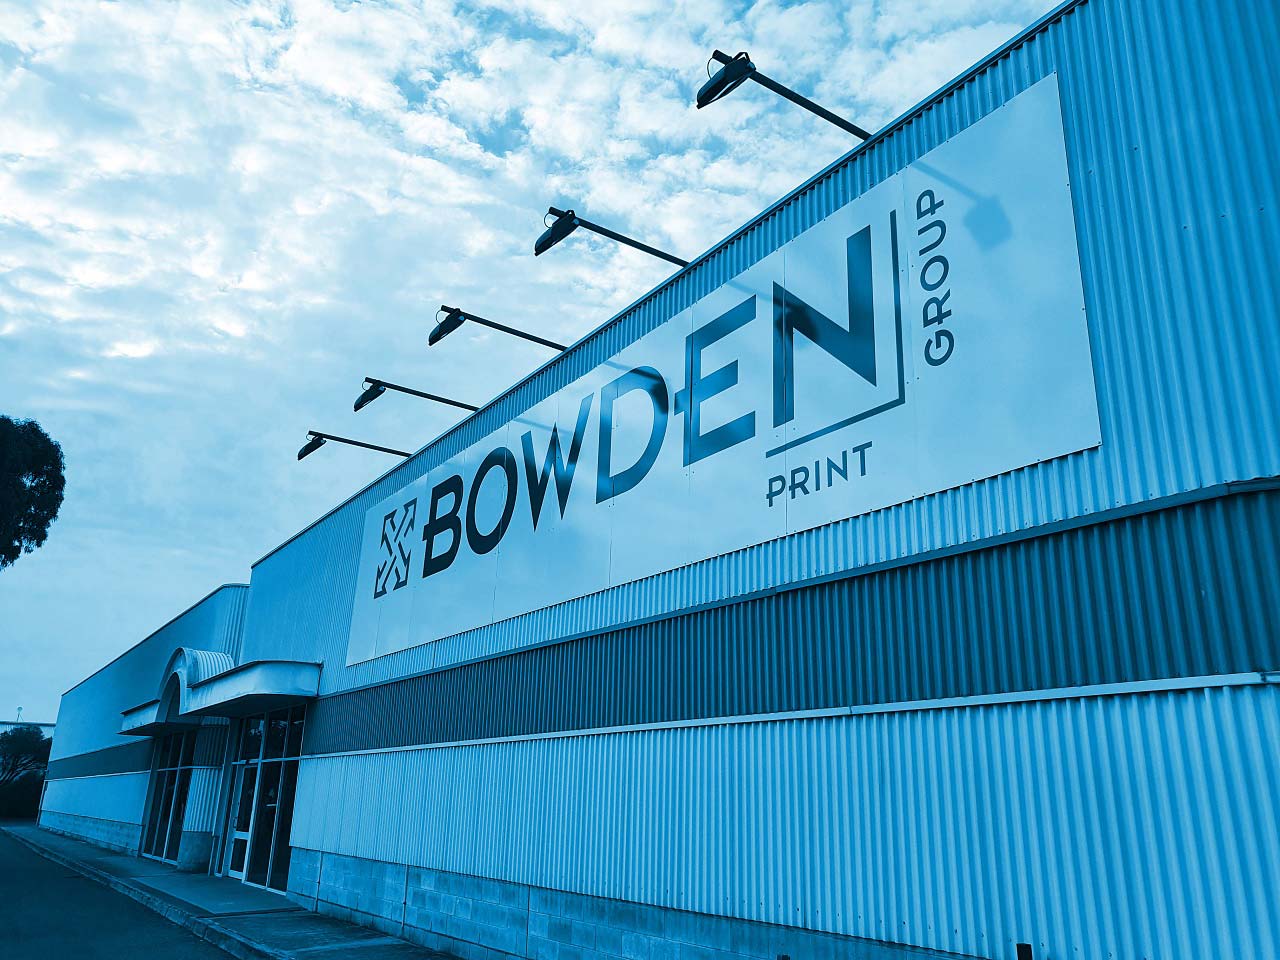 Bowden Print Group building